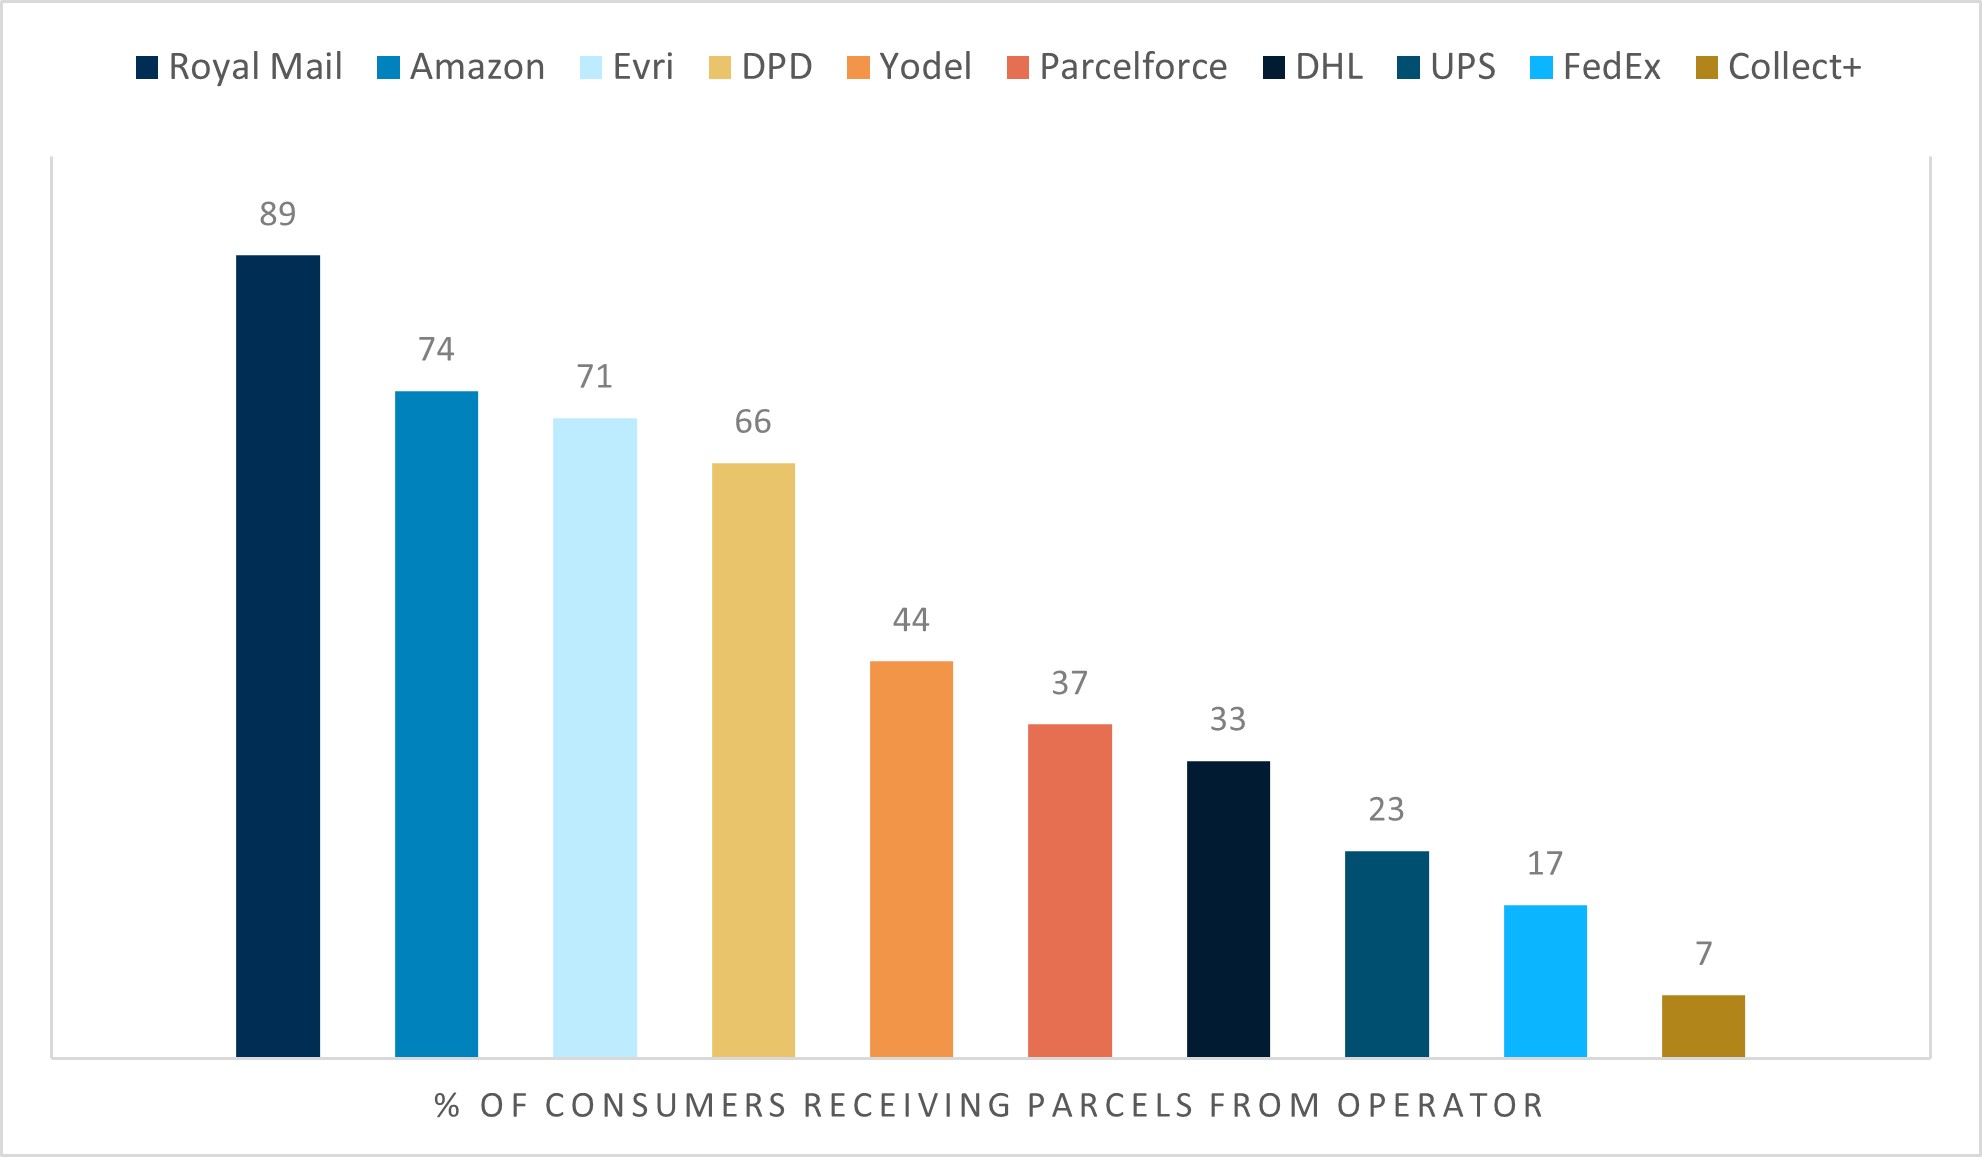 89% of consumers have had Royal Mail deliver to them, 75% of have had Amazon, 71% Evri, 66% DPD, 44% Yodel, 37% Parcelforce, DHL 33%, UPS 23%, FedEx 17% and Collect+ 7%.